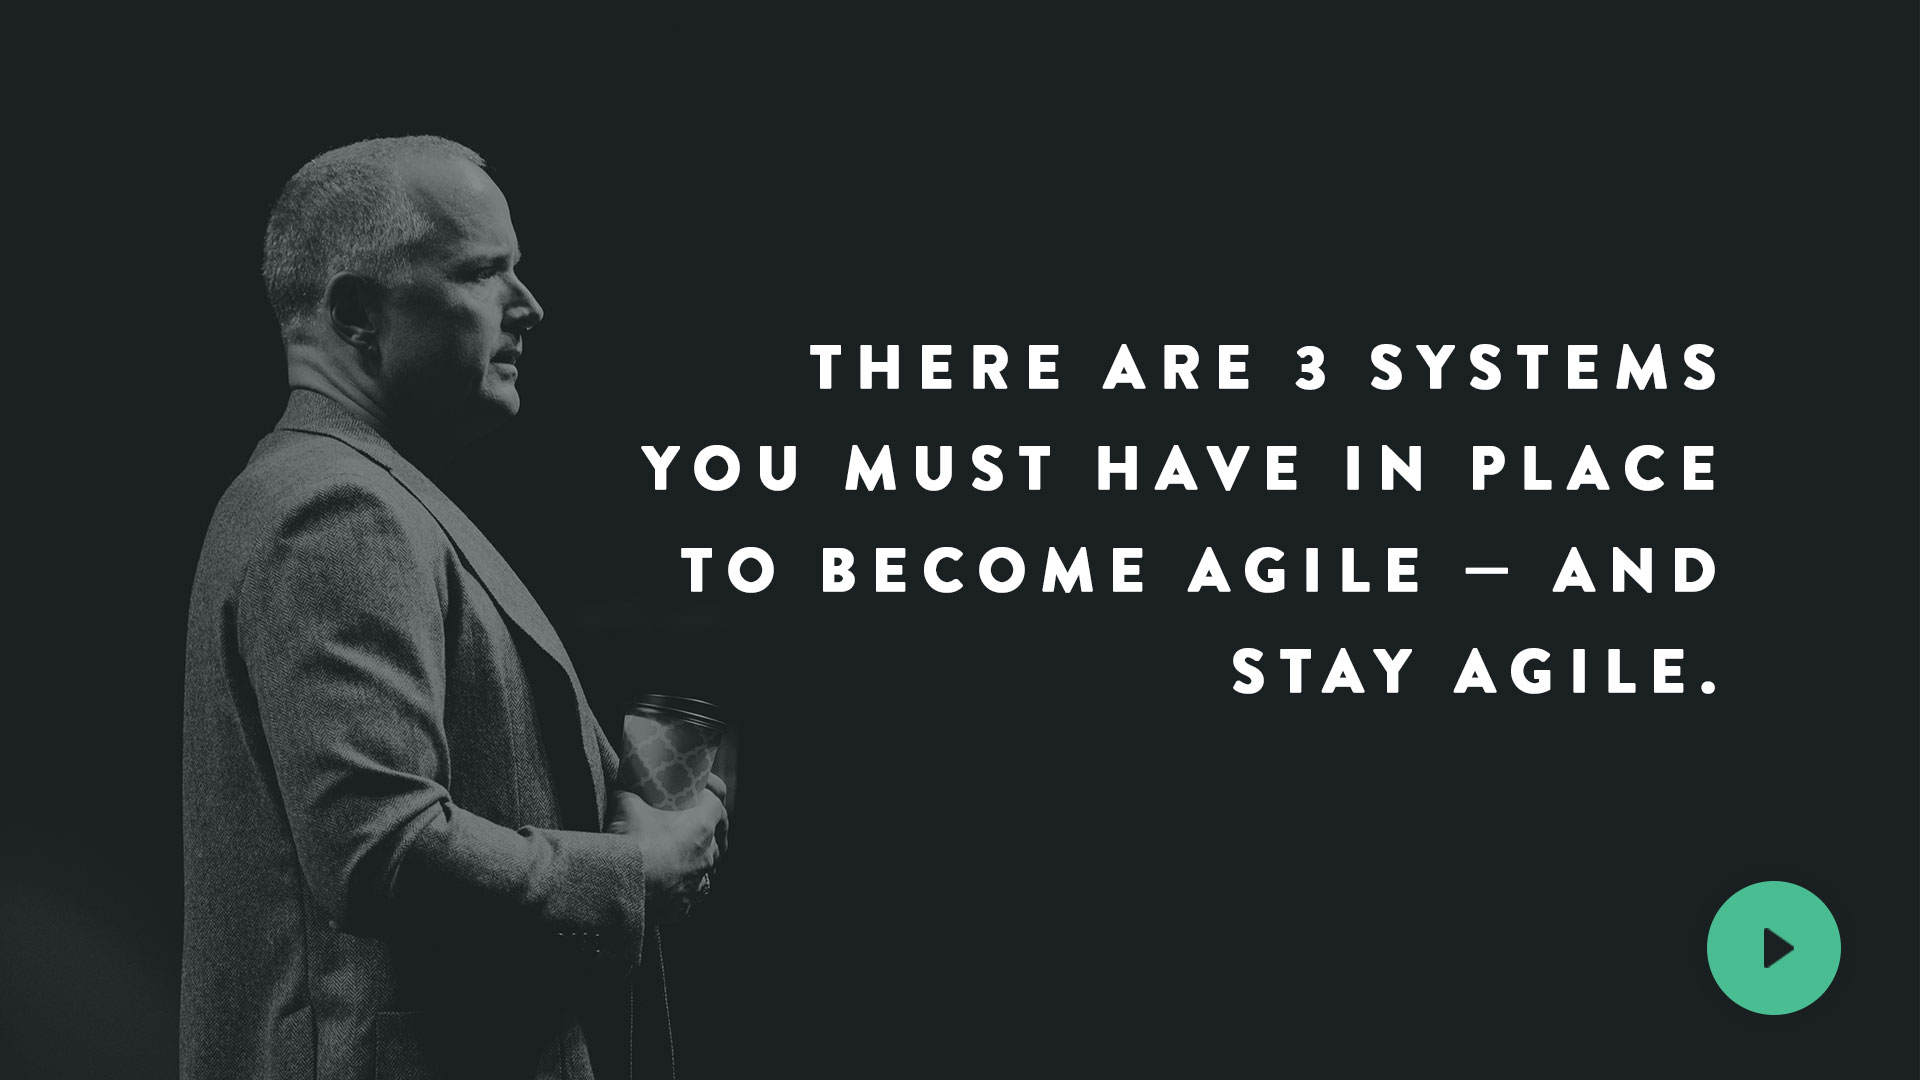 Mike Cottmeyer | Elevate Agile 2019 | The Systems of Agility